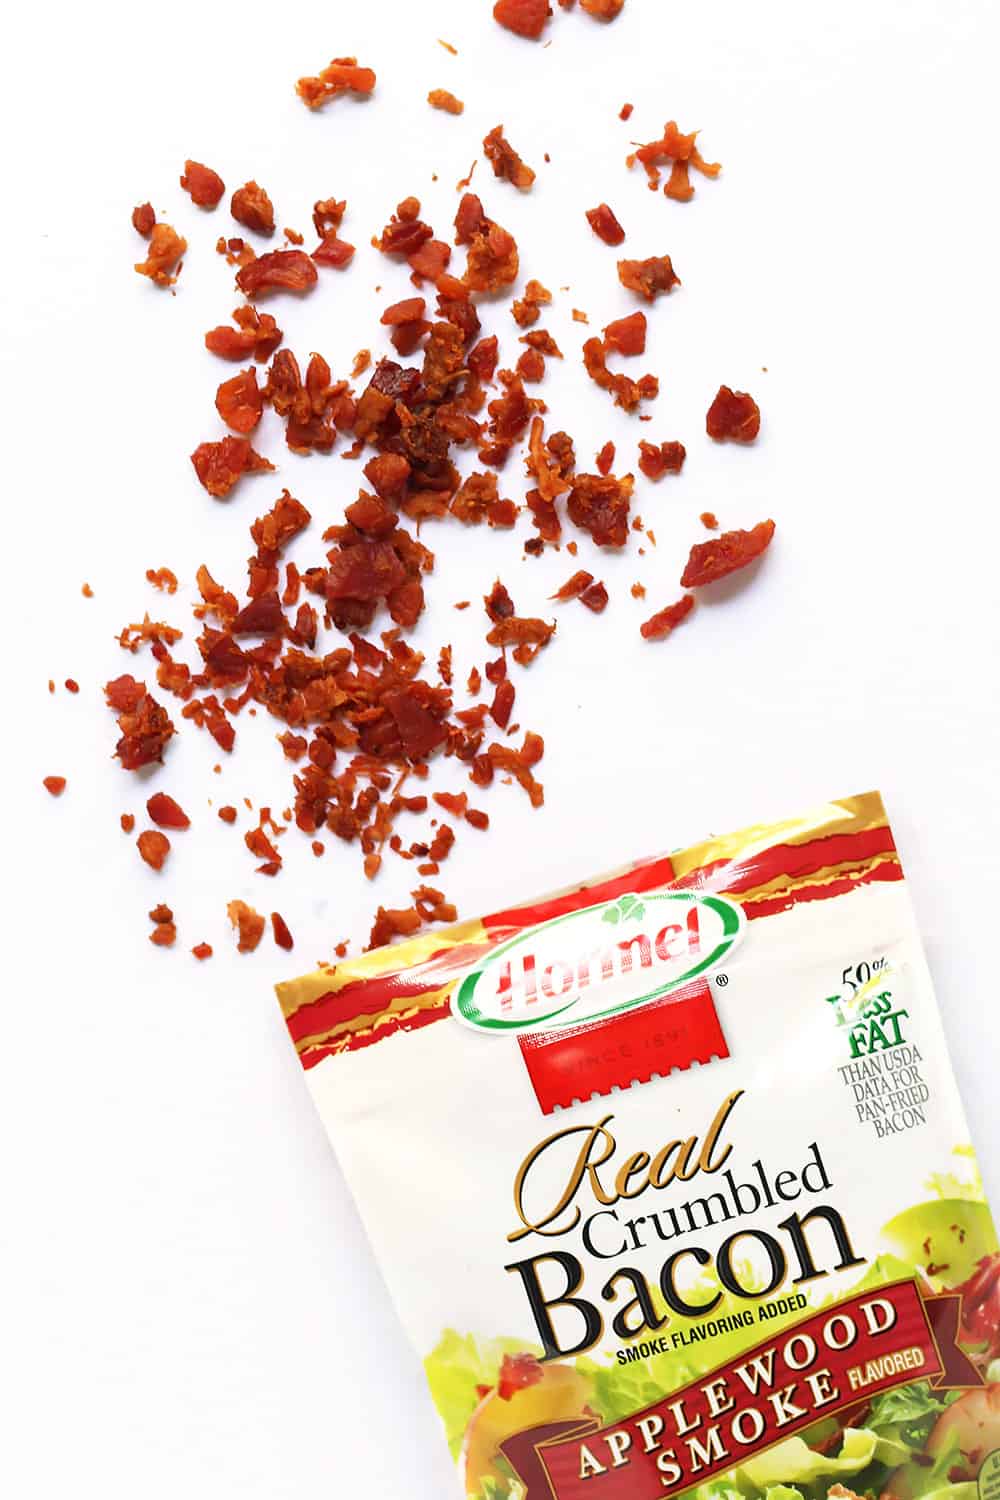 Hormel Real Crumbled Bacon